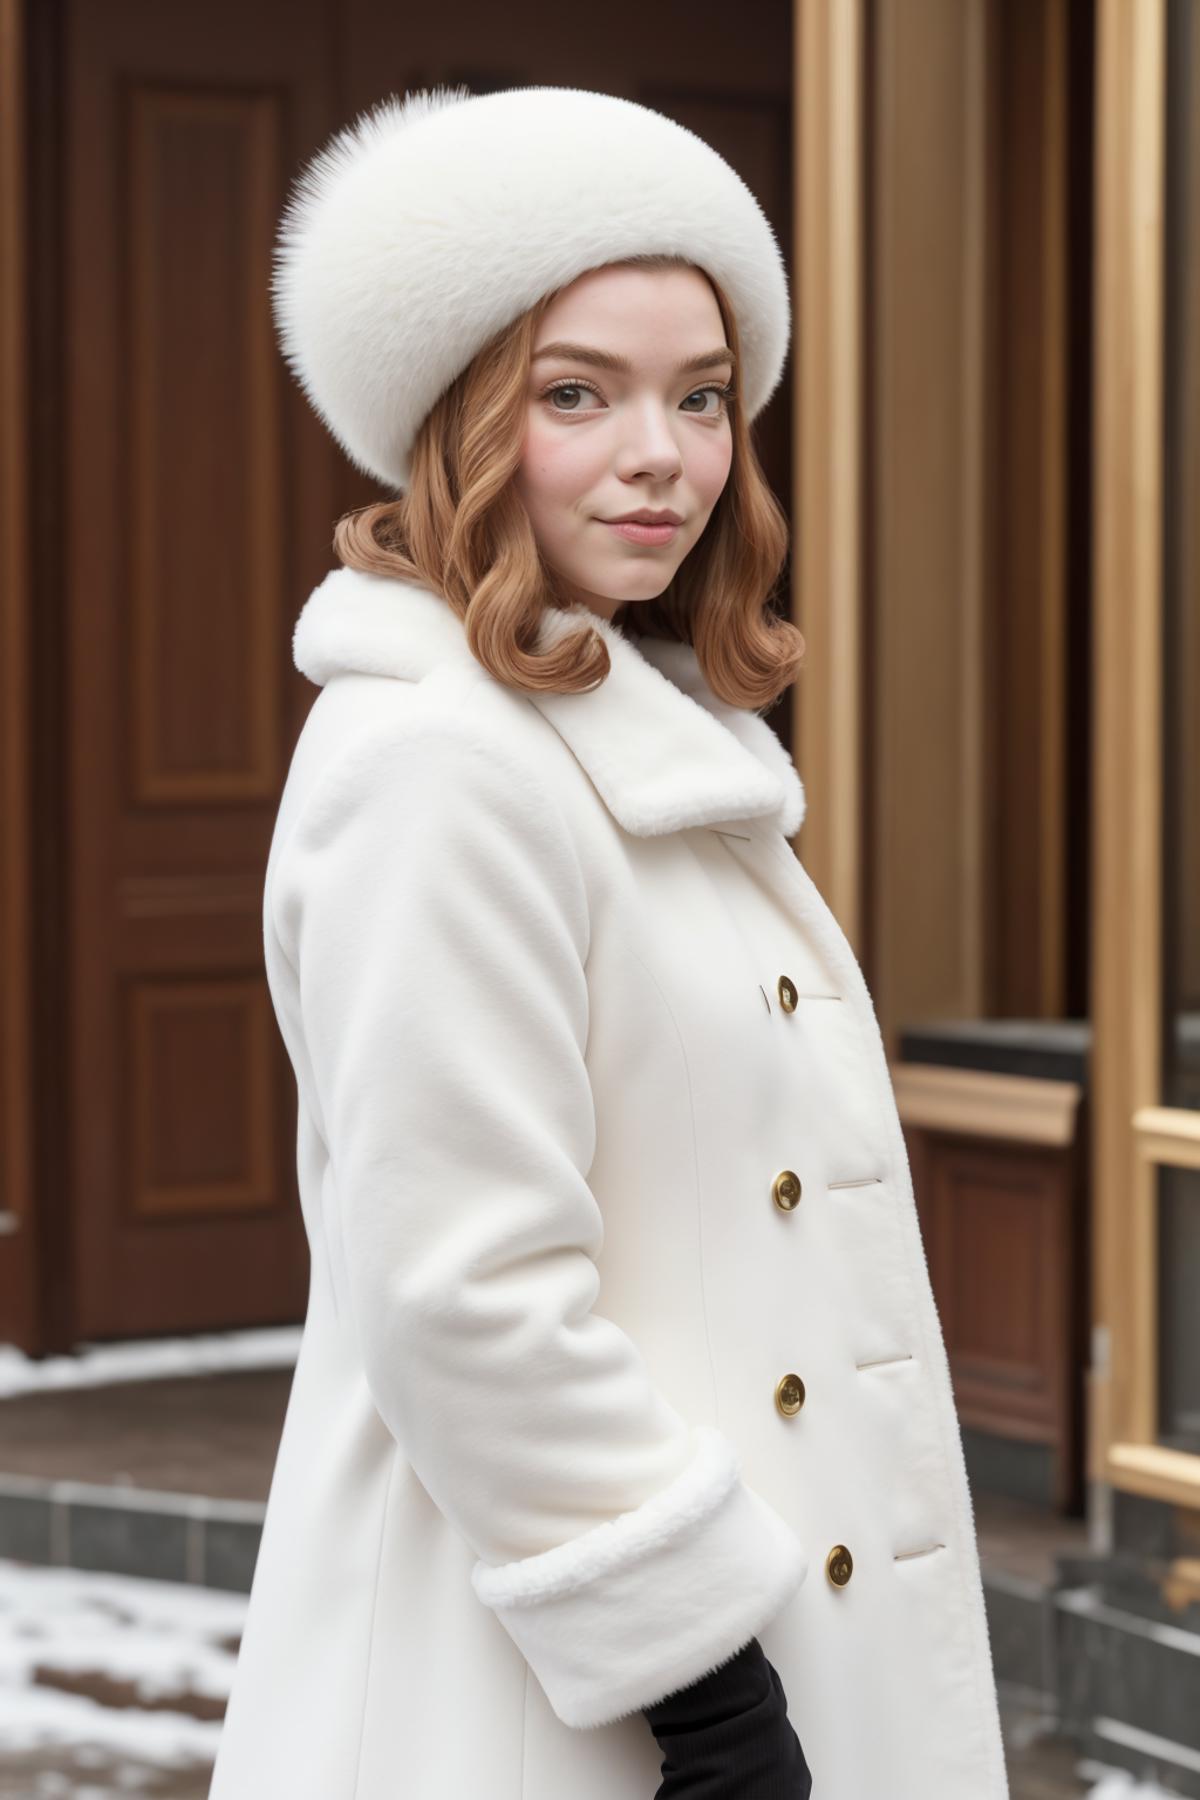 Anya Taylor Joy - The Queen's Gambit image by jacklaughed